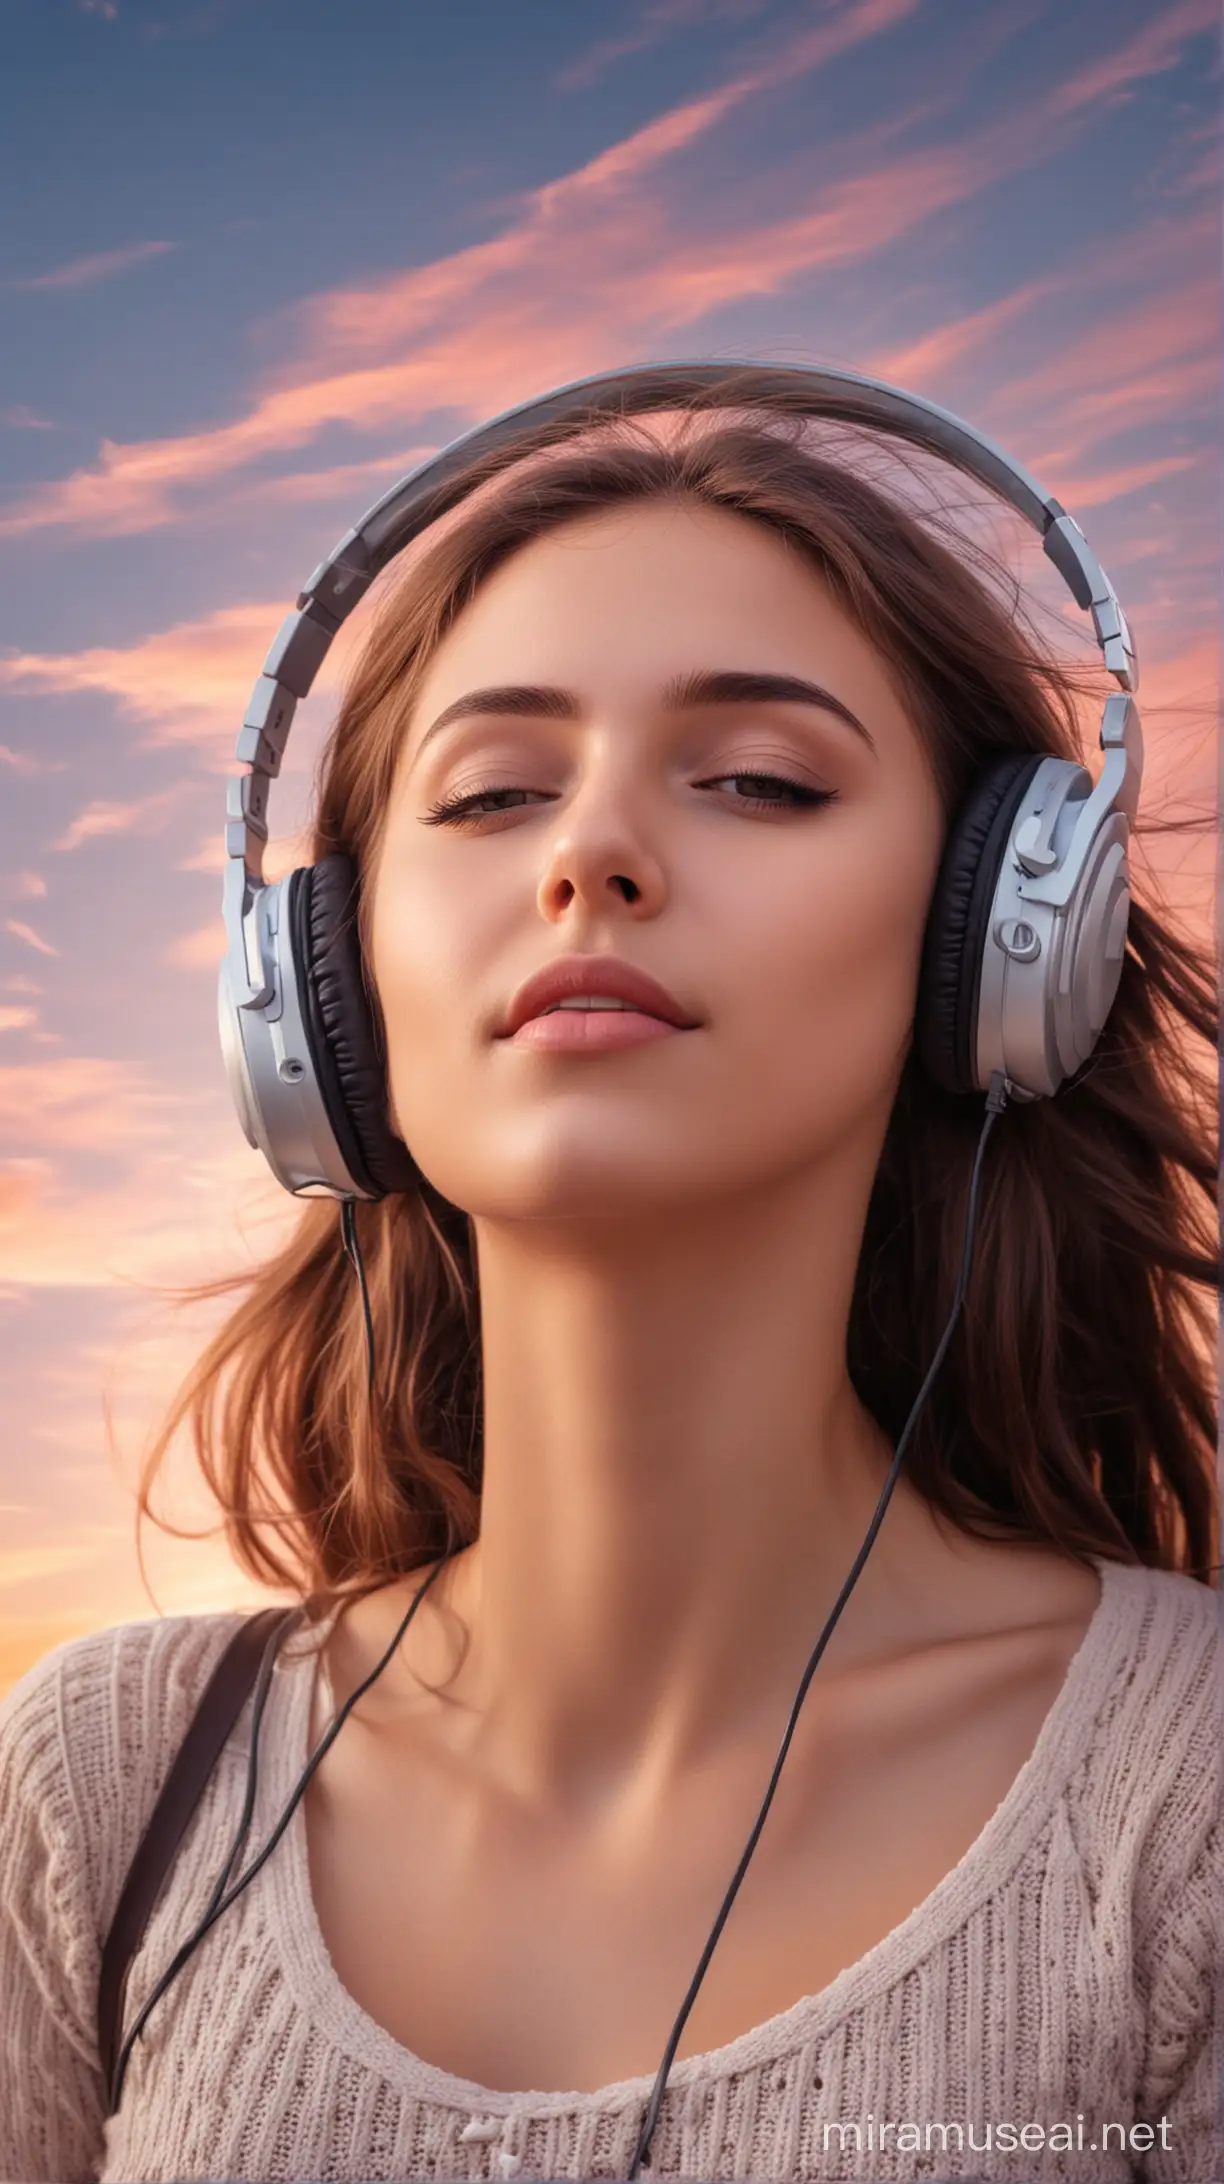 Dreamy Girl in Love Listening to Music Under the Sky